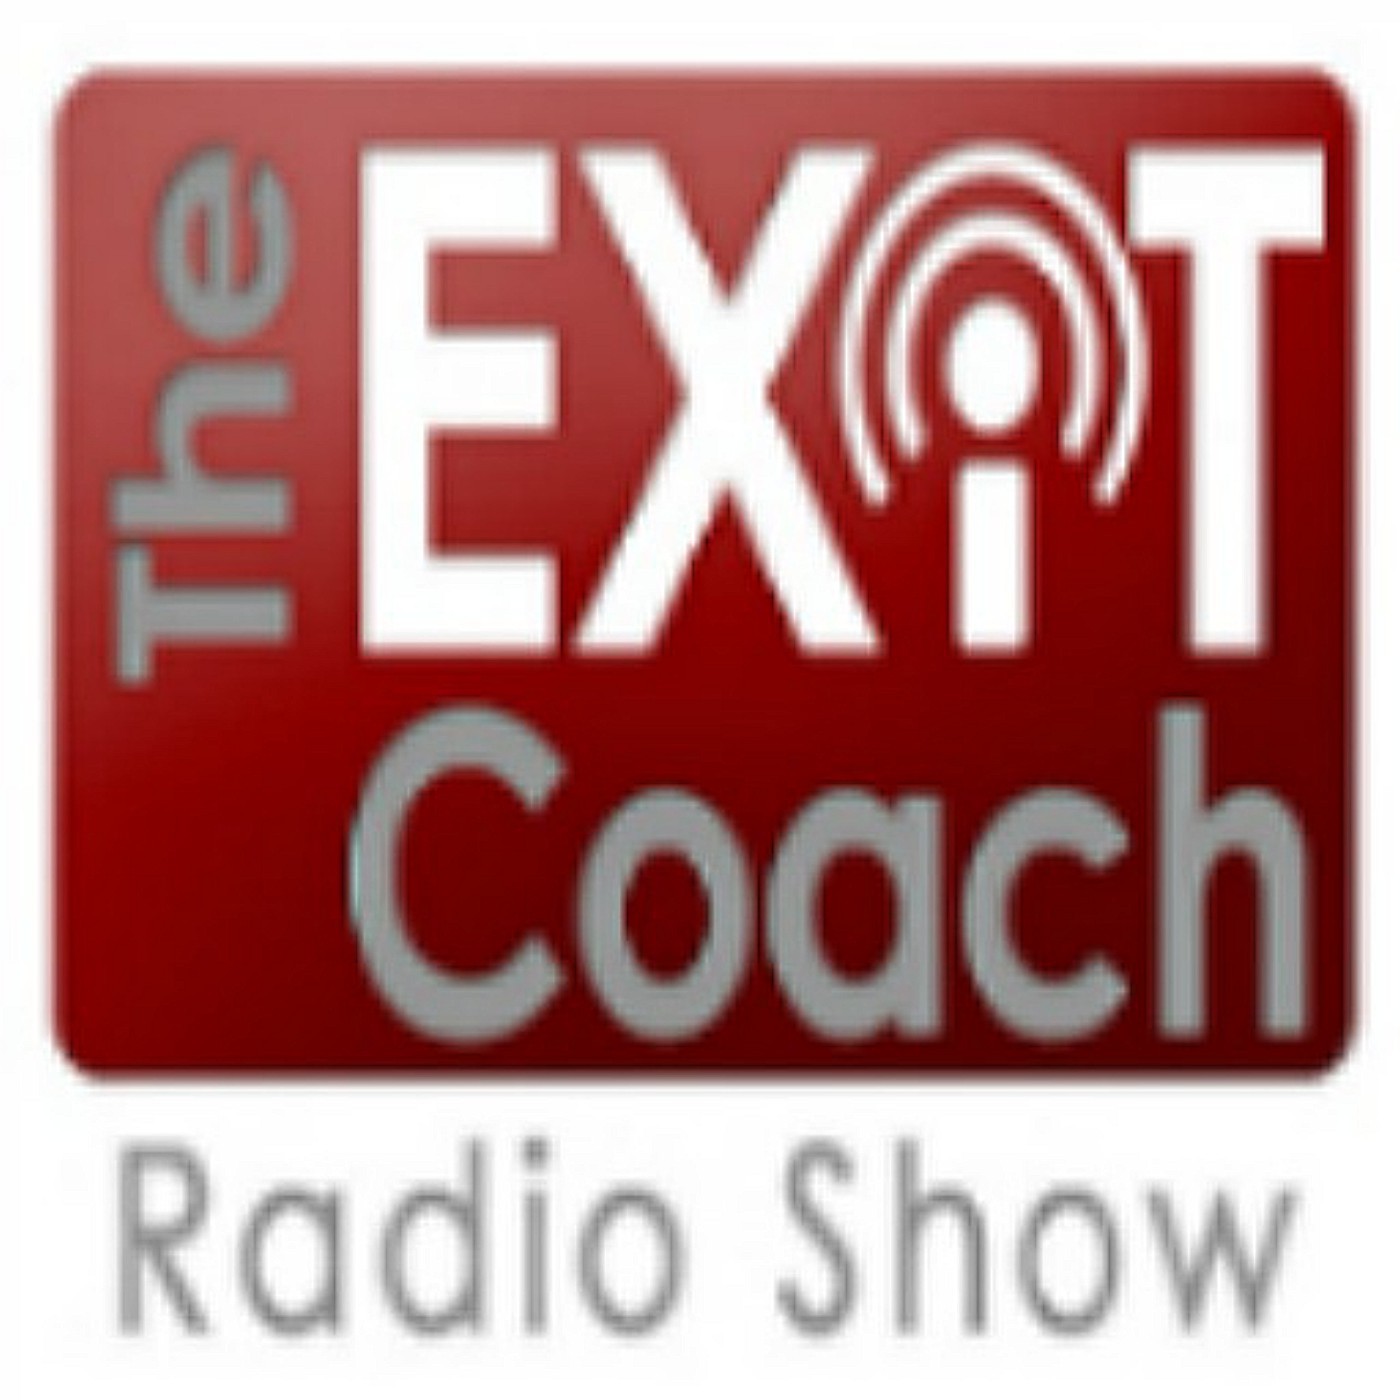 Exit Coach 20M INTERVIEW: How to Own Leveraged Real Estate Without Debt - Sanford Coggins